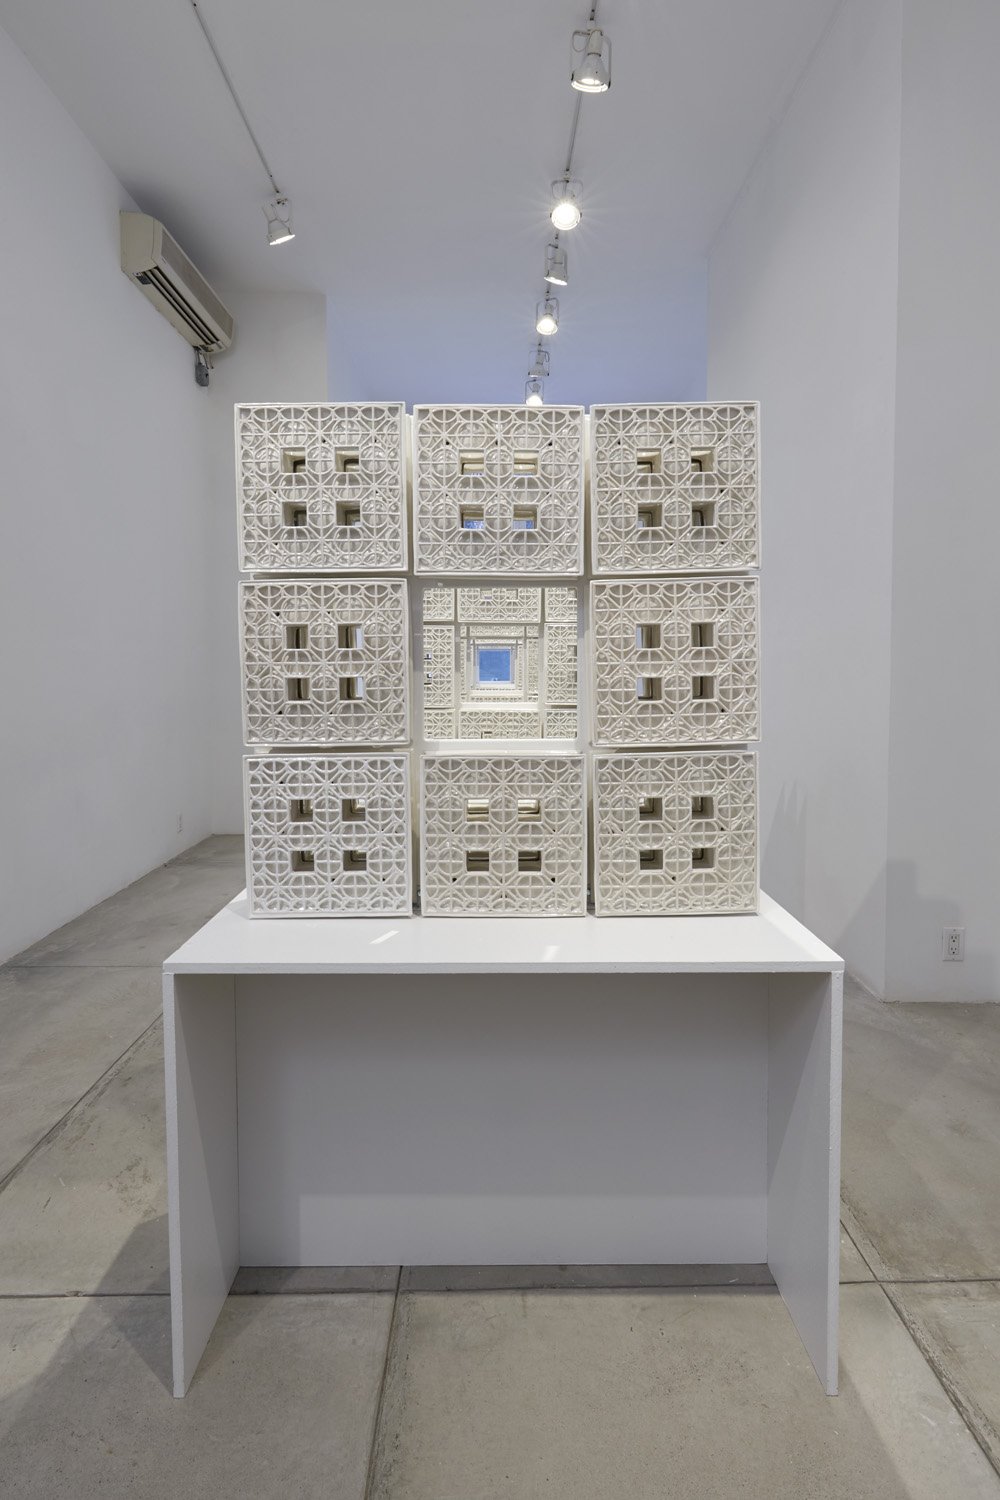 The Architecture of Solace, Installed at Greenwich House Pottery, Cone 6 Stoneware and Hardware, 200 x 41 x 58 in. Photo: Alan Wiener